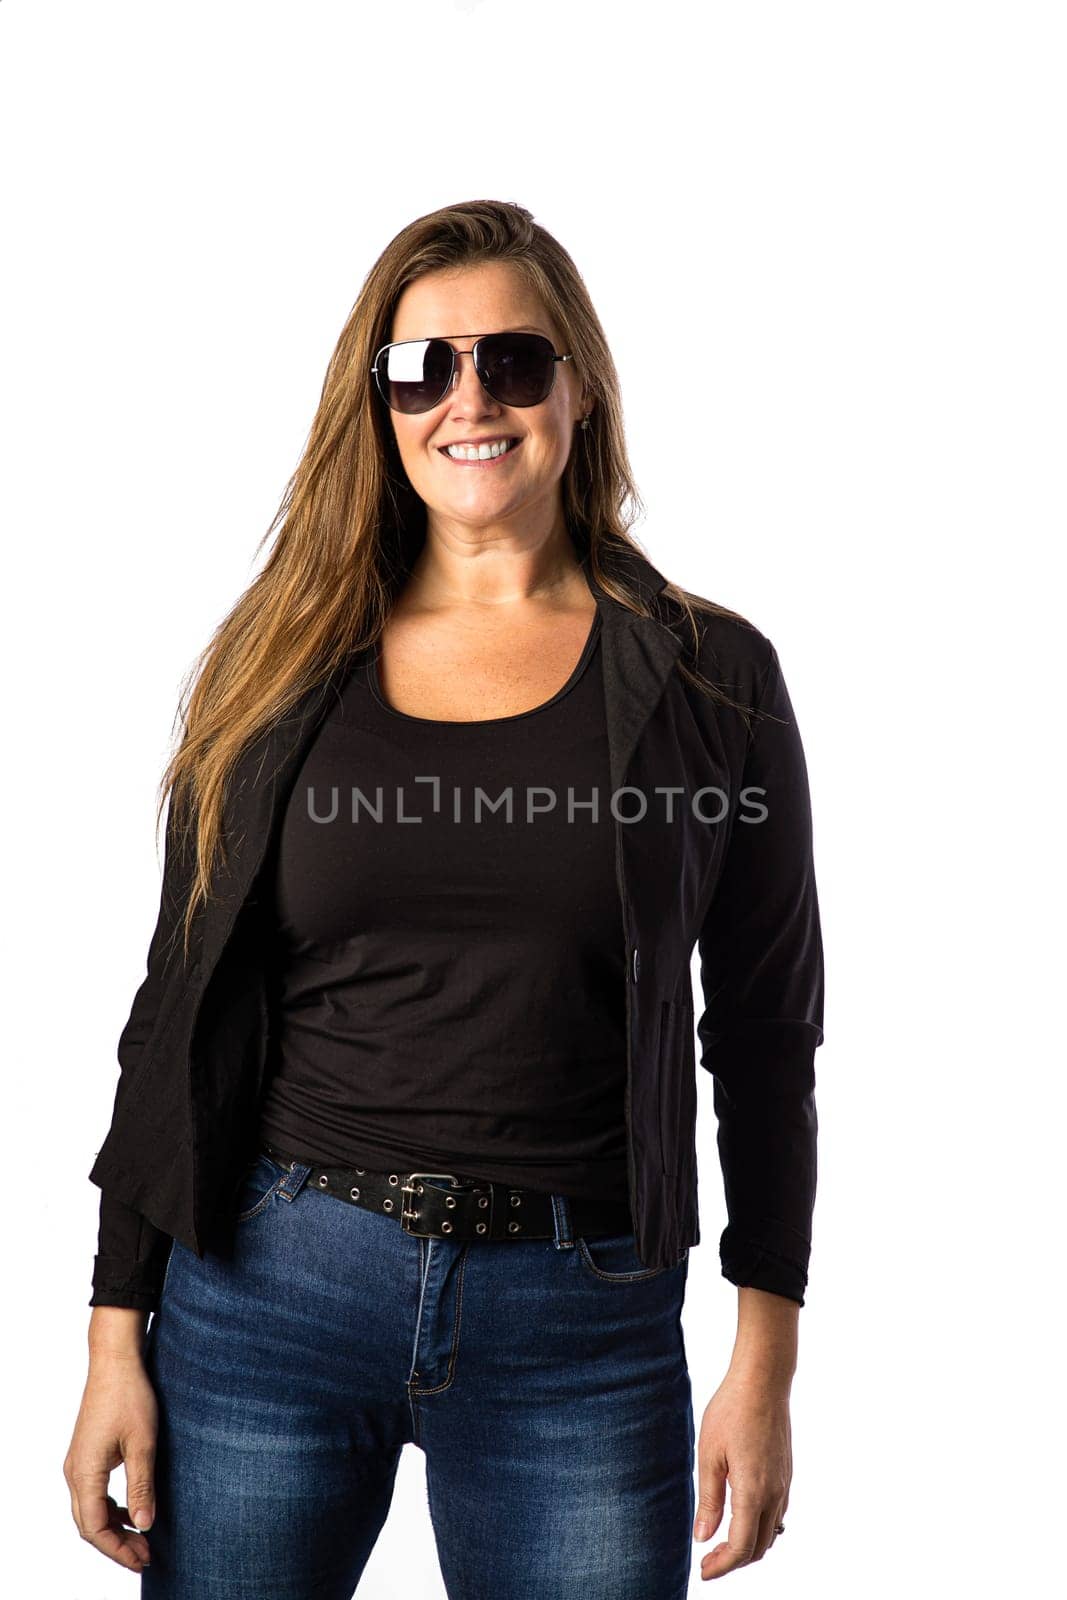 Forty year old woman, wearing sunglasses and a sport jacket, isolated on a white background